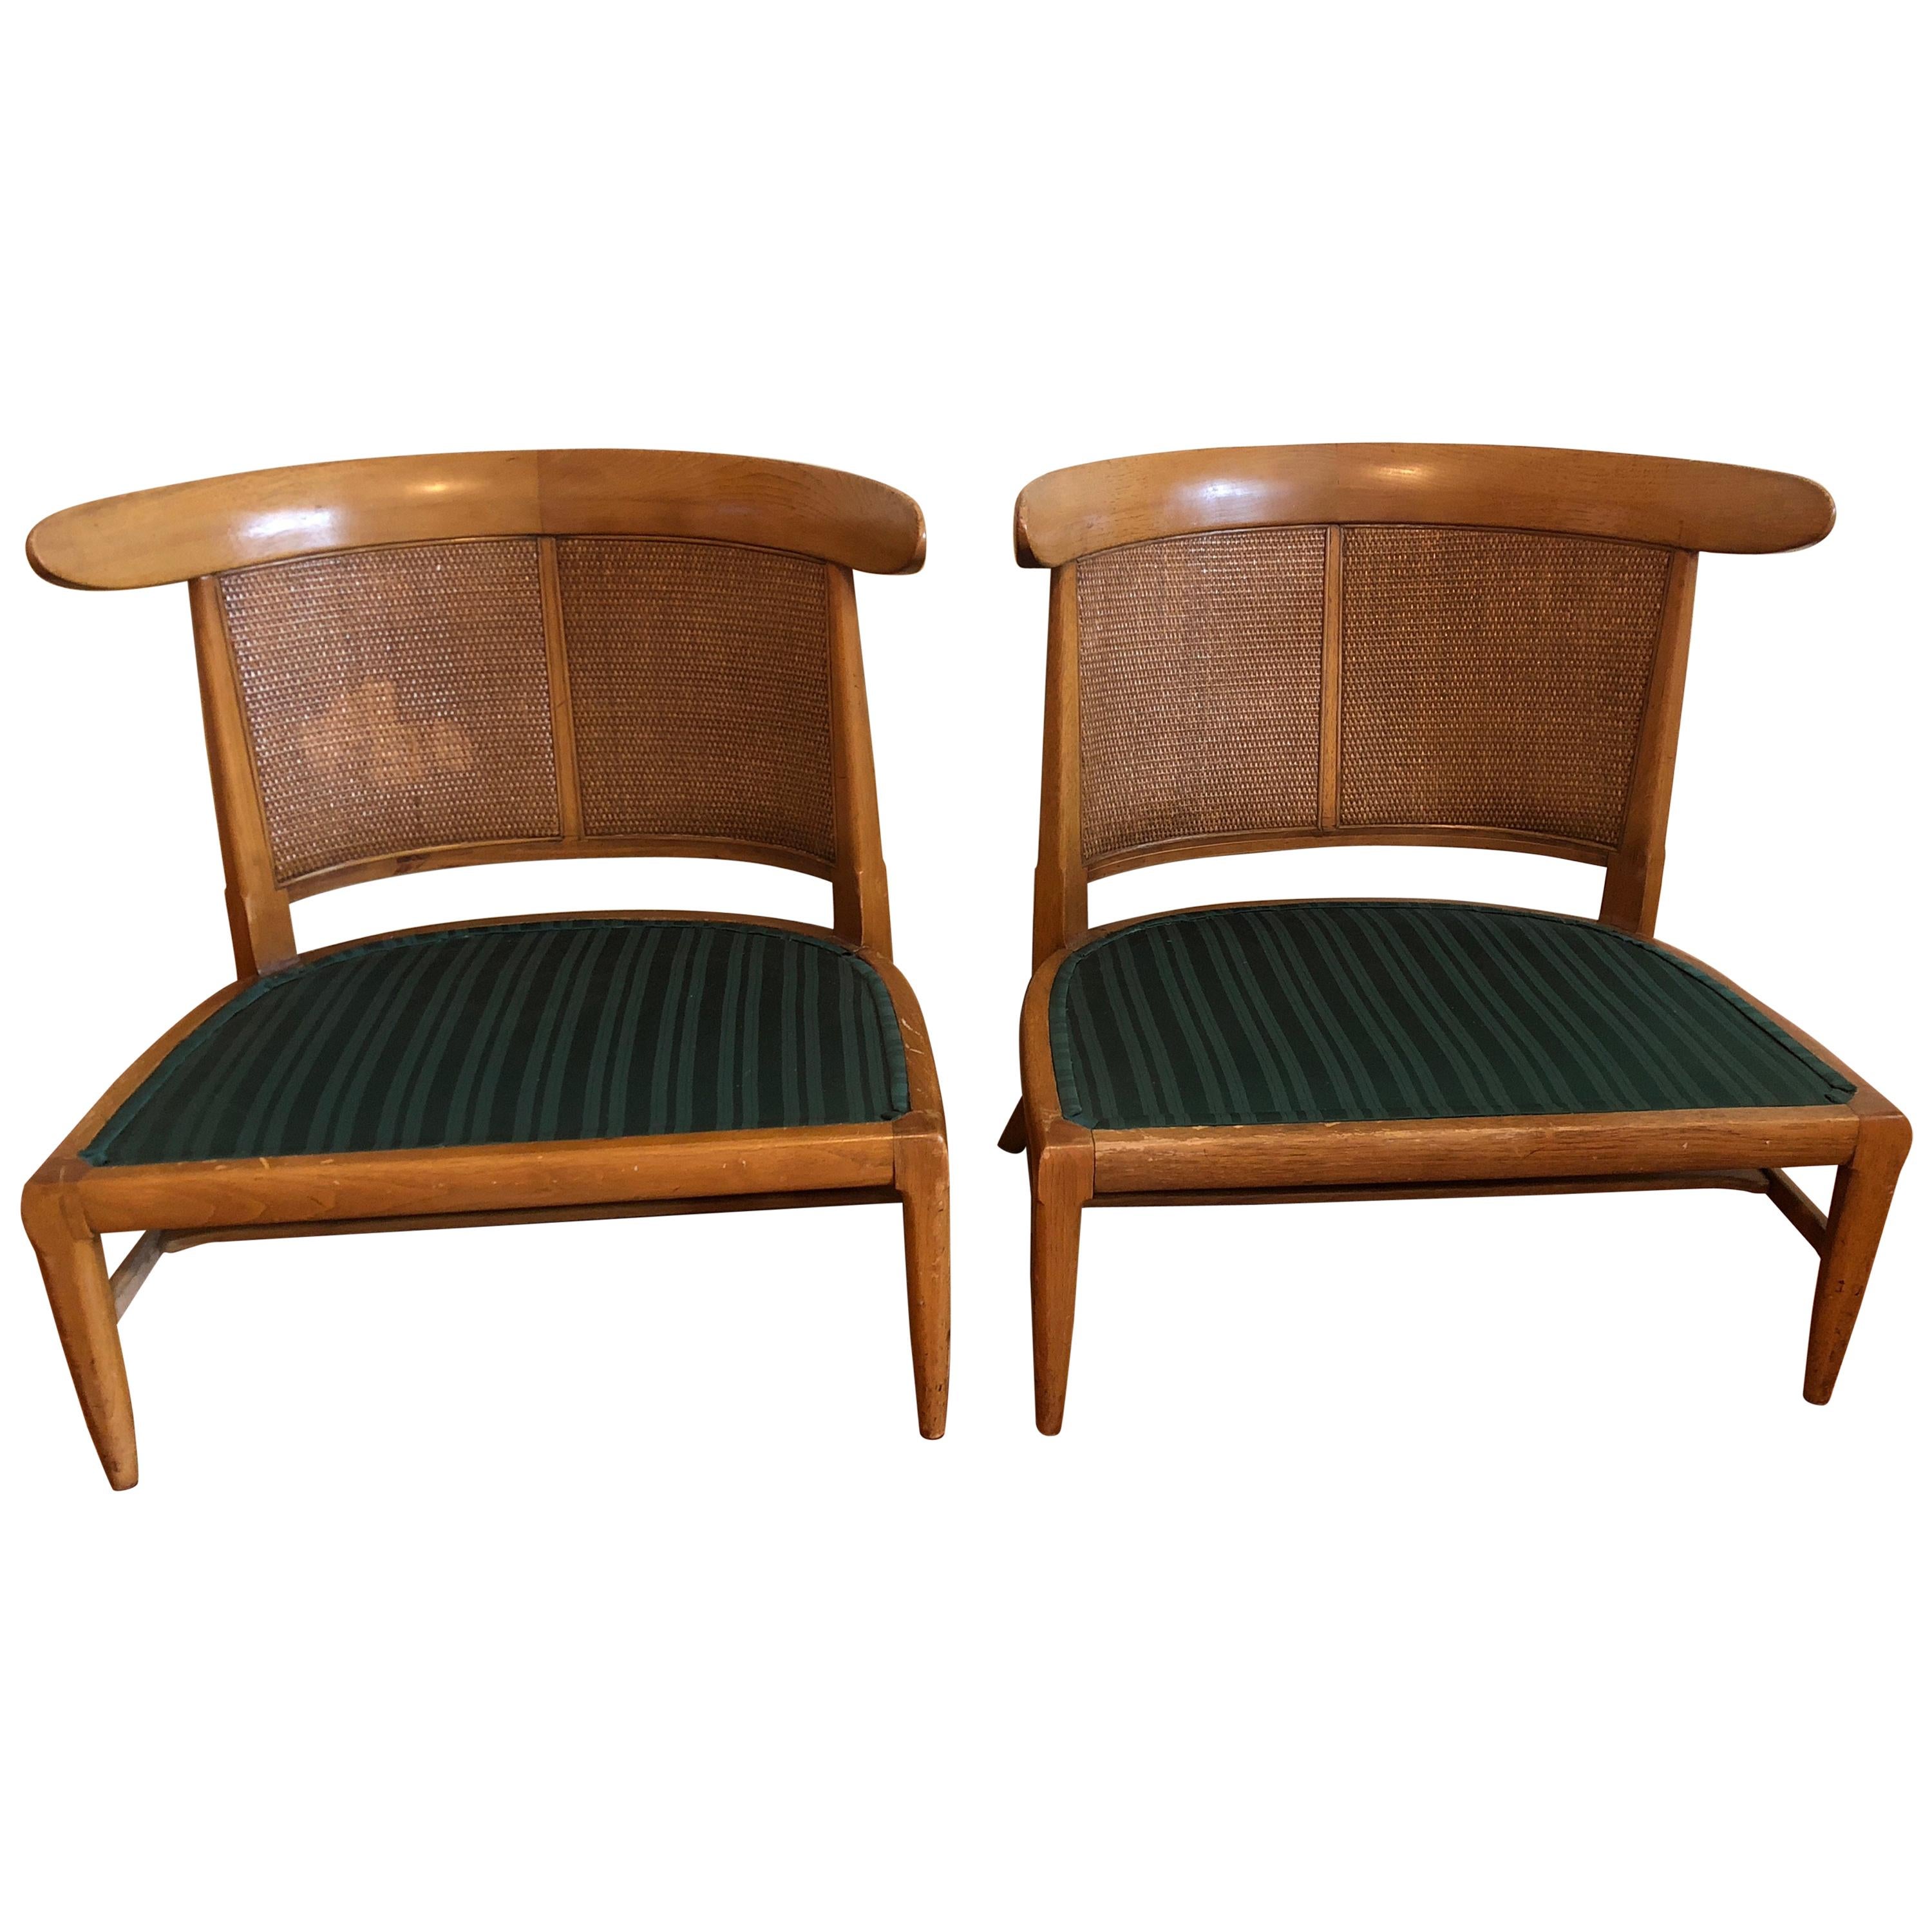 Cane Walnut Chairs by John Lubberts & Lambert Mulder for Tomlinson 